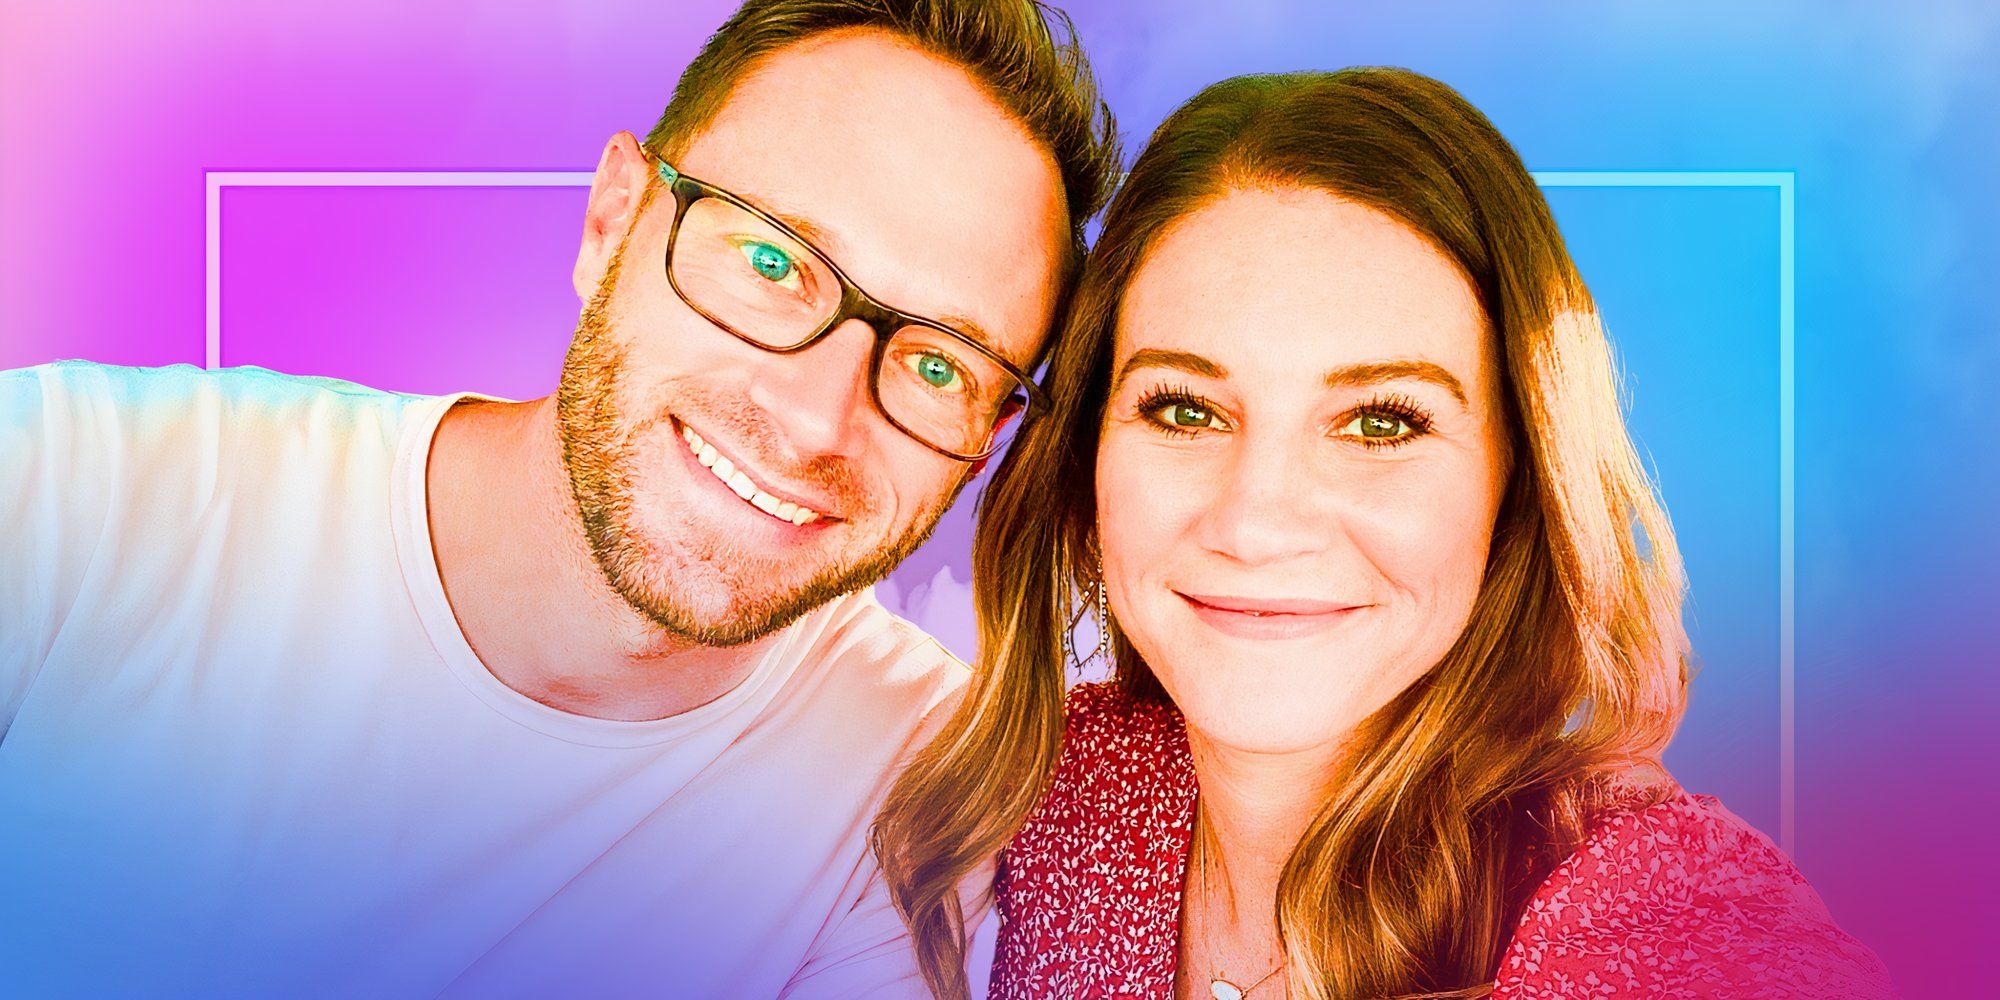 OutDaughtered Danielle & Adam Busby smiling